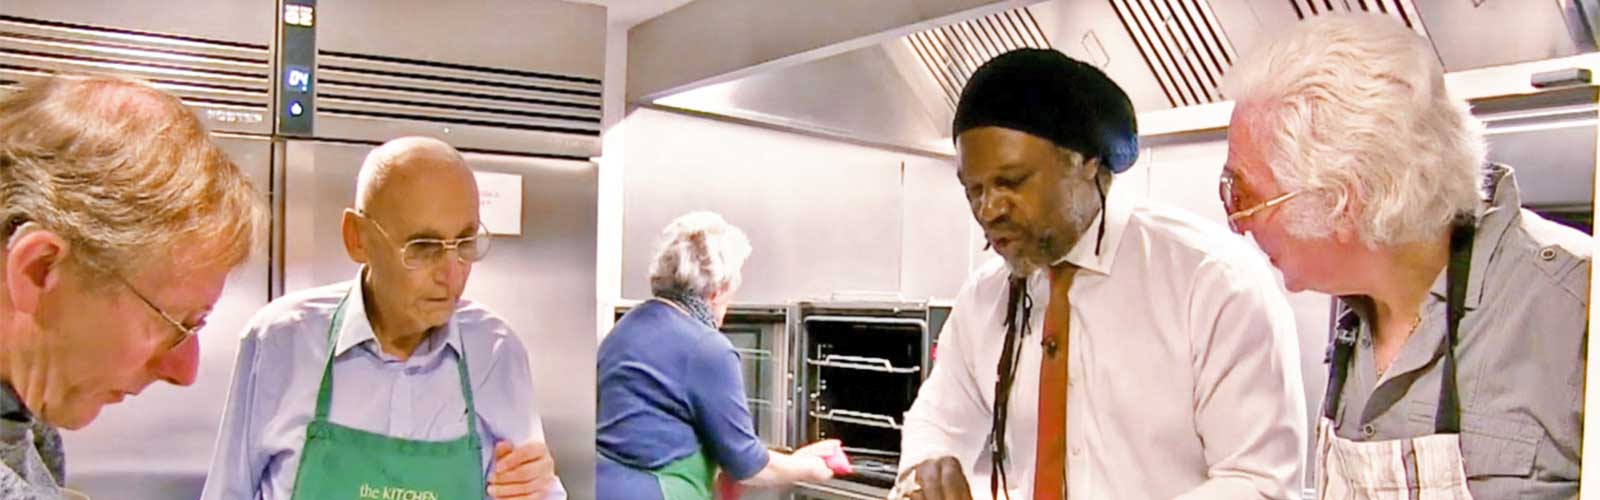 Chef and businessman Levi Roots, hosting an Age Uk cookery class